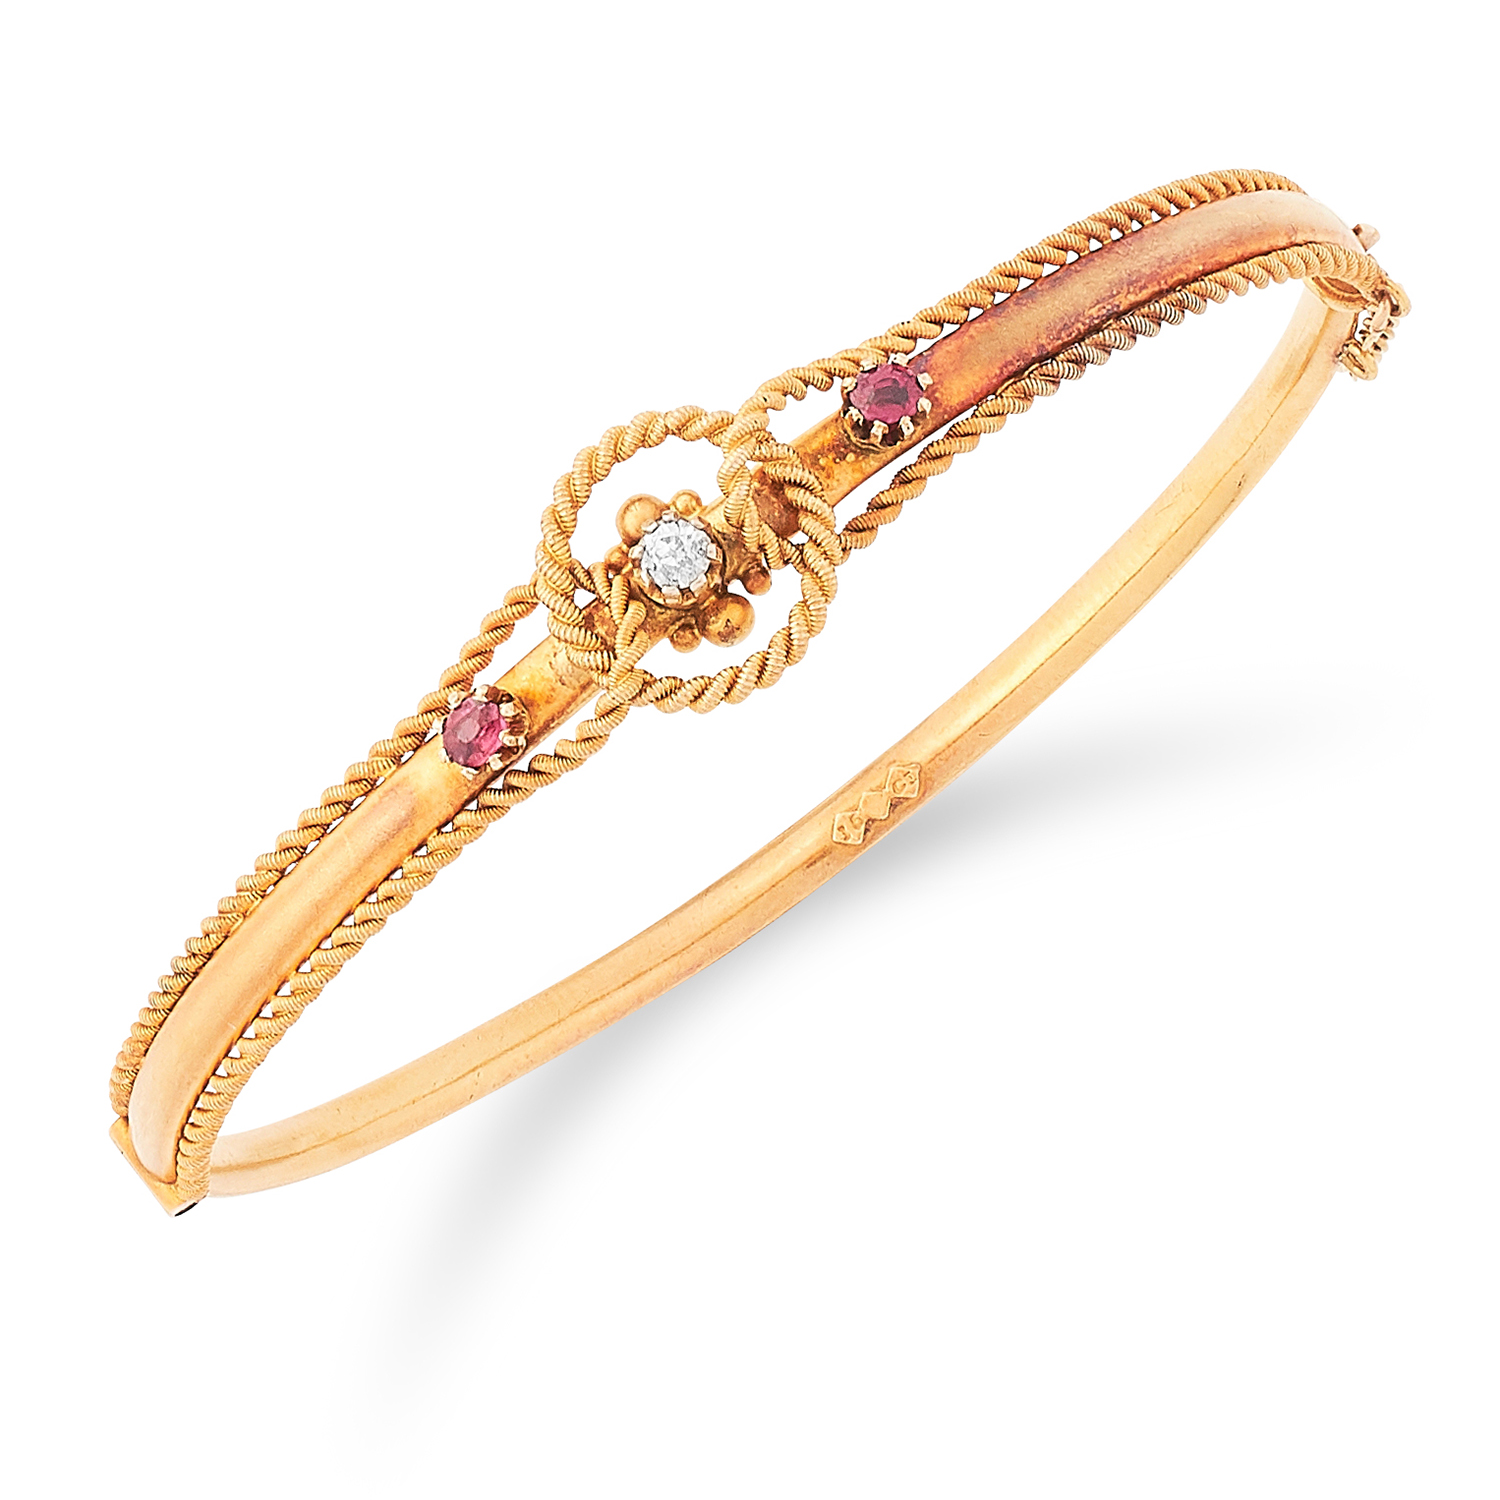 RUBY AND DIAMOND BANGLE set with two round cut rubies and a diamond in twisted gold motif, 6cm inner